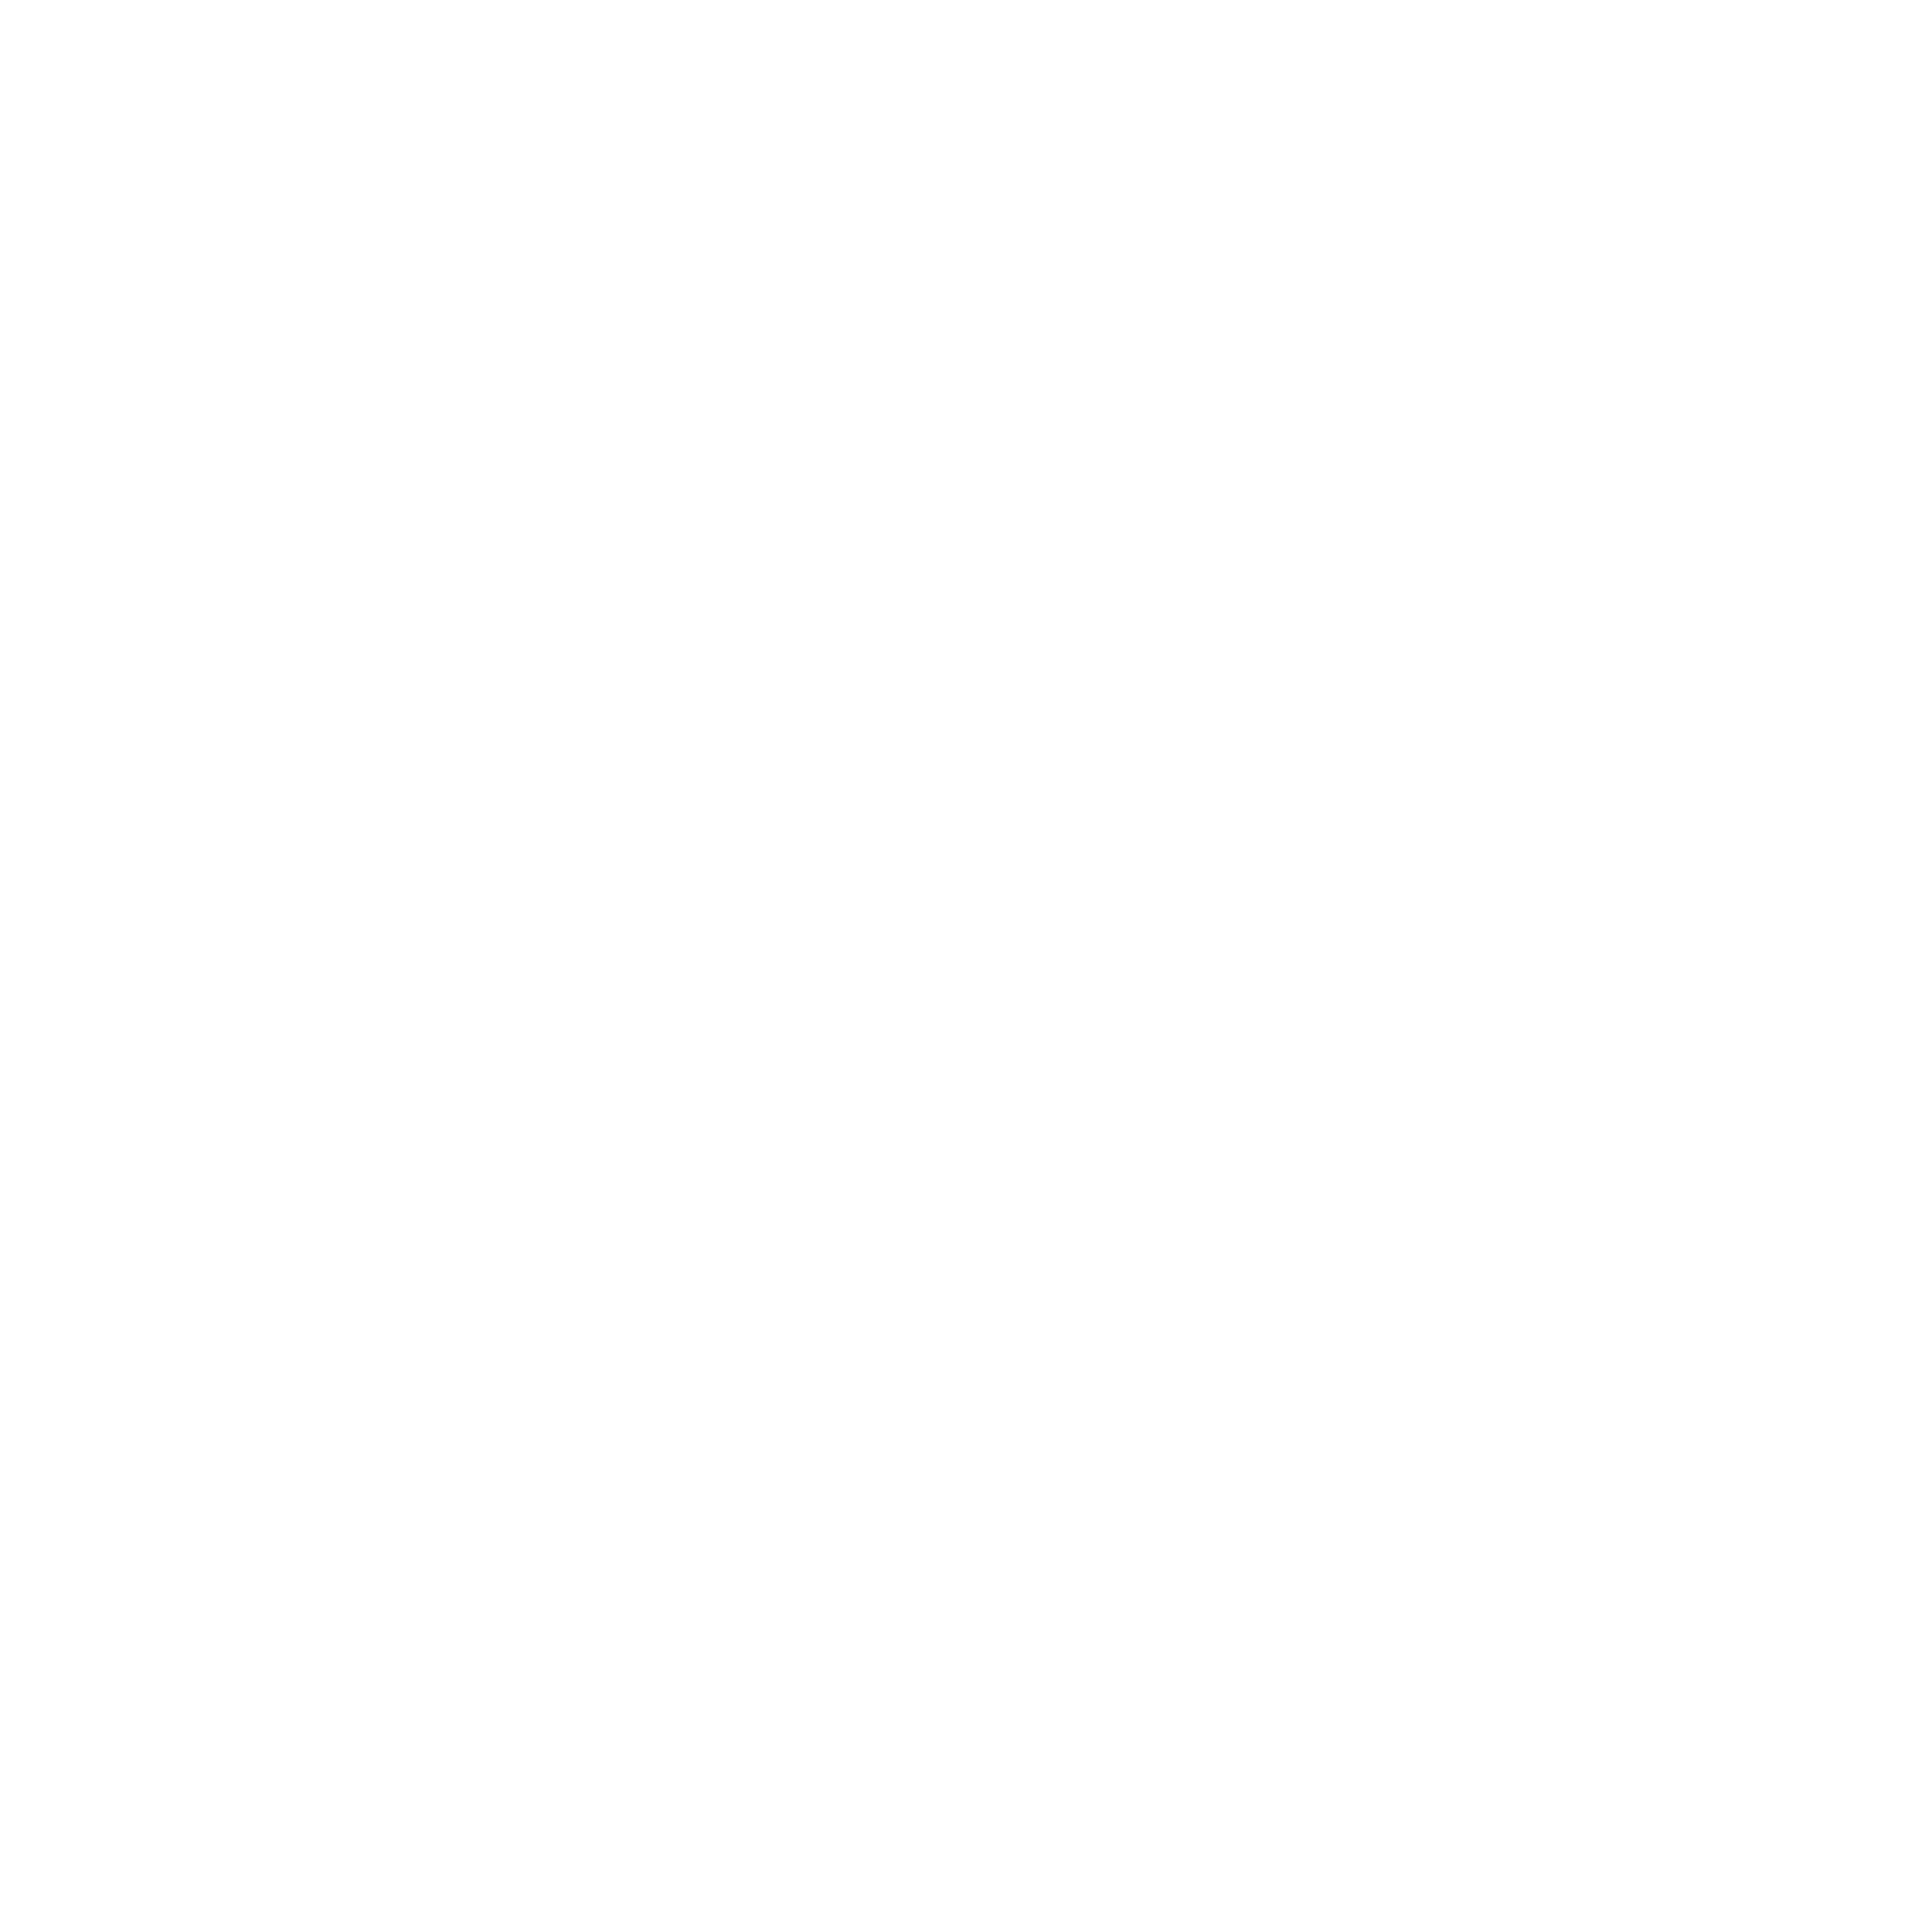 Aloha Airlines Logo - Aloha Airlines 02 Logo PNG Transparent & SVG Vector